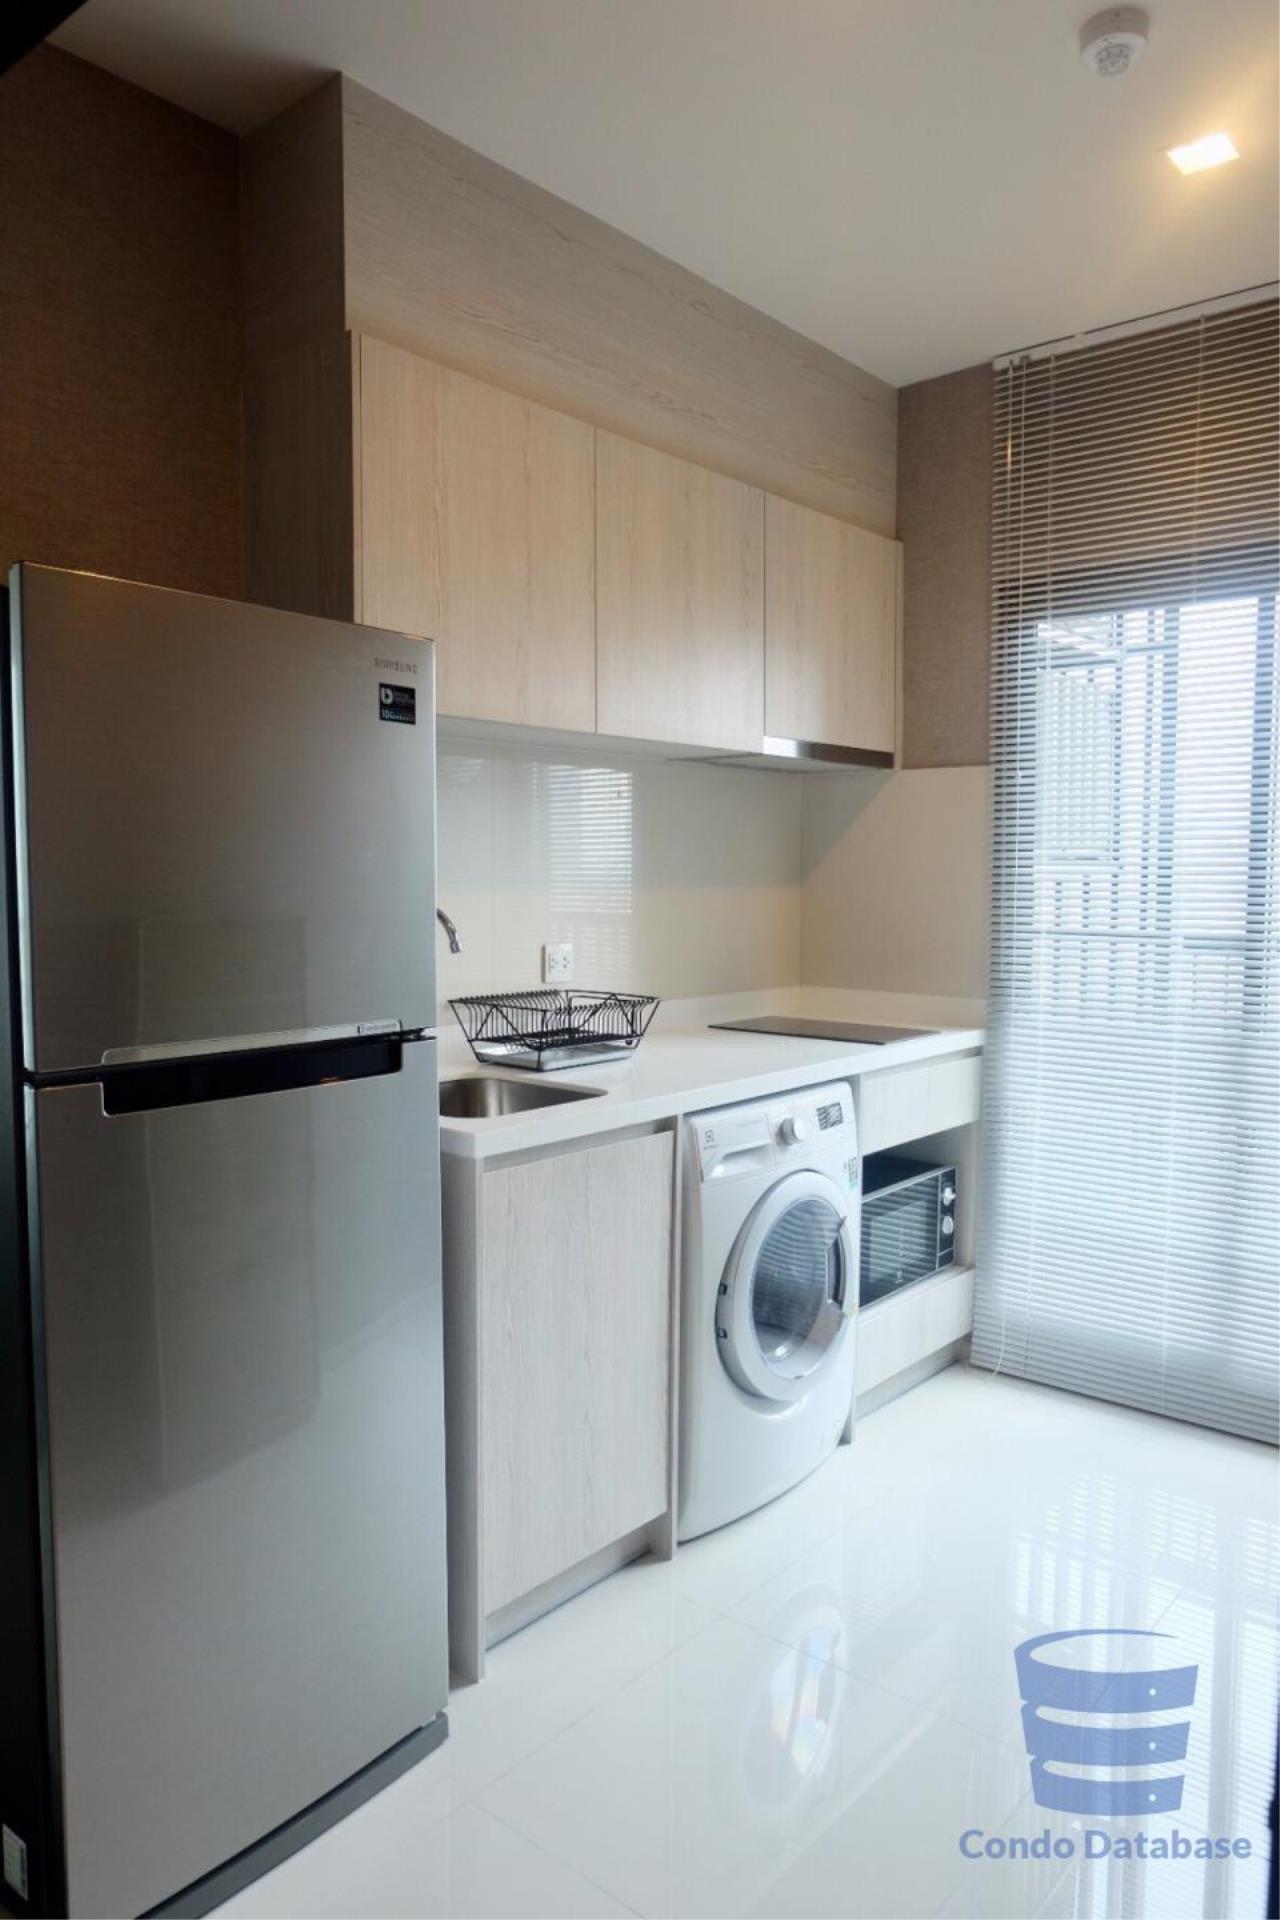 Condo Database Agency's [Property ID: 100-113-22456] 2 Bedrooms 2 Bathrooms Size 49Sqm At Life Sukhumvit 48 for Rent 31000 THB 5